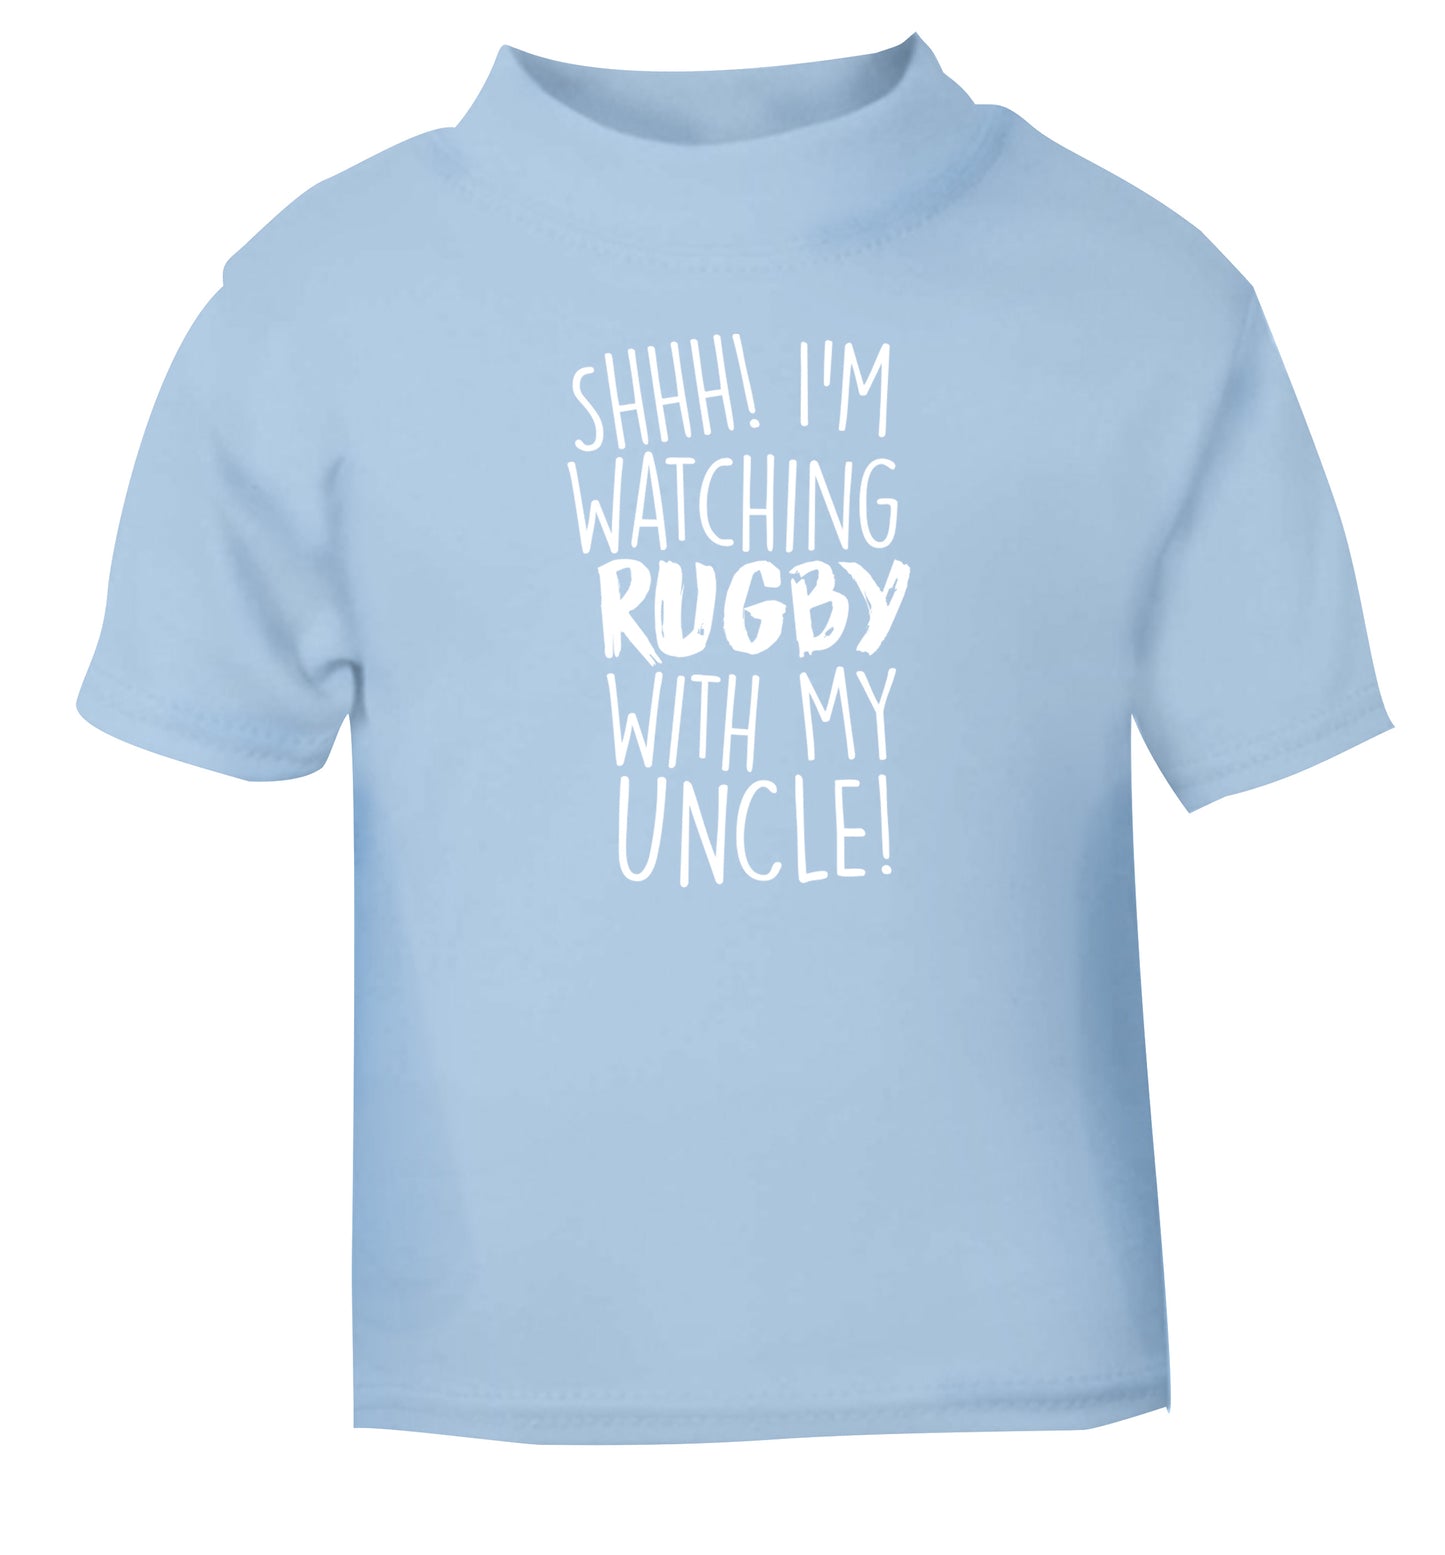 Shh.. I'm watching rugby with my uncle light blue Baby Toddler Tshirt 2 Years